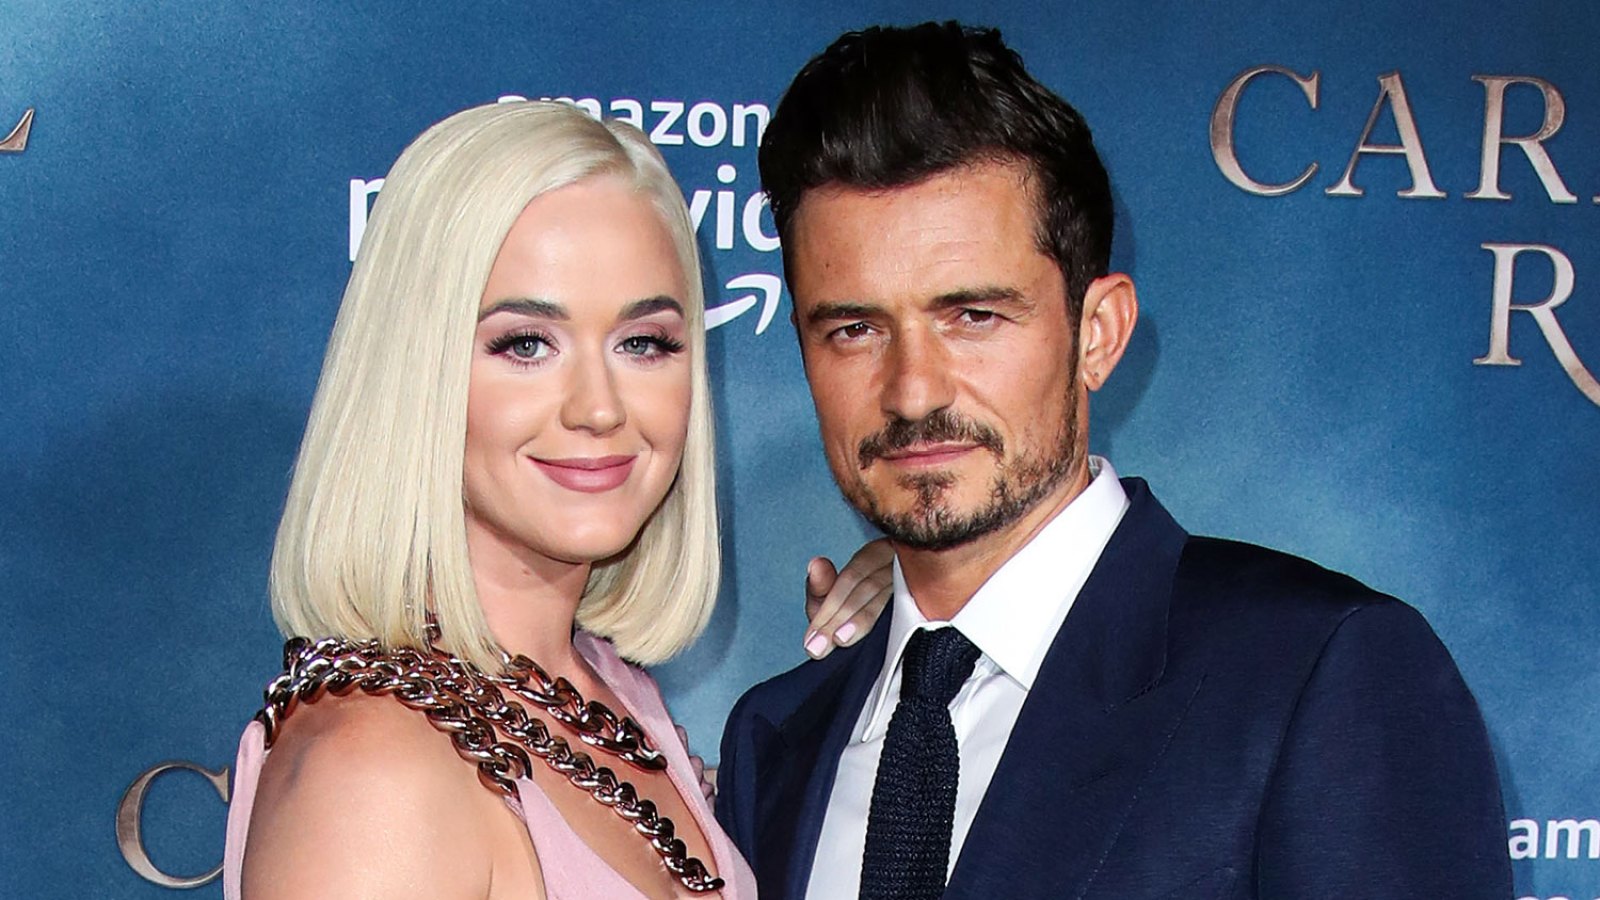 Katy Perry and Orlando Bloom Like to Take Cold Plunges Together